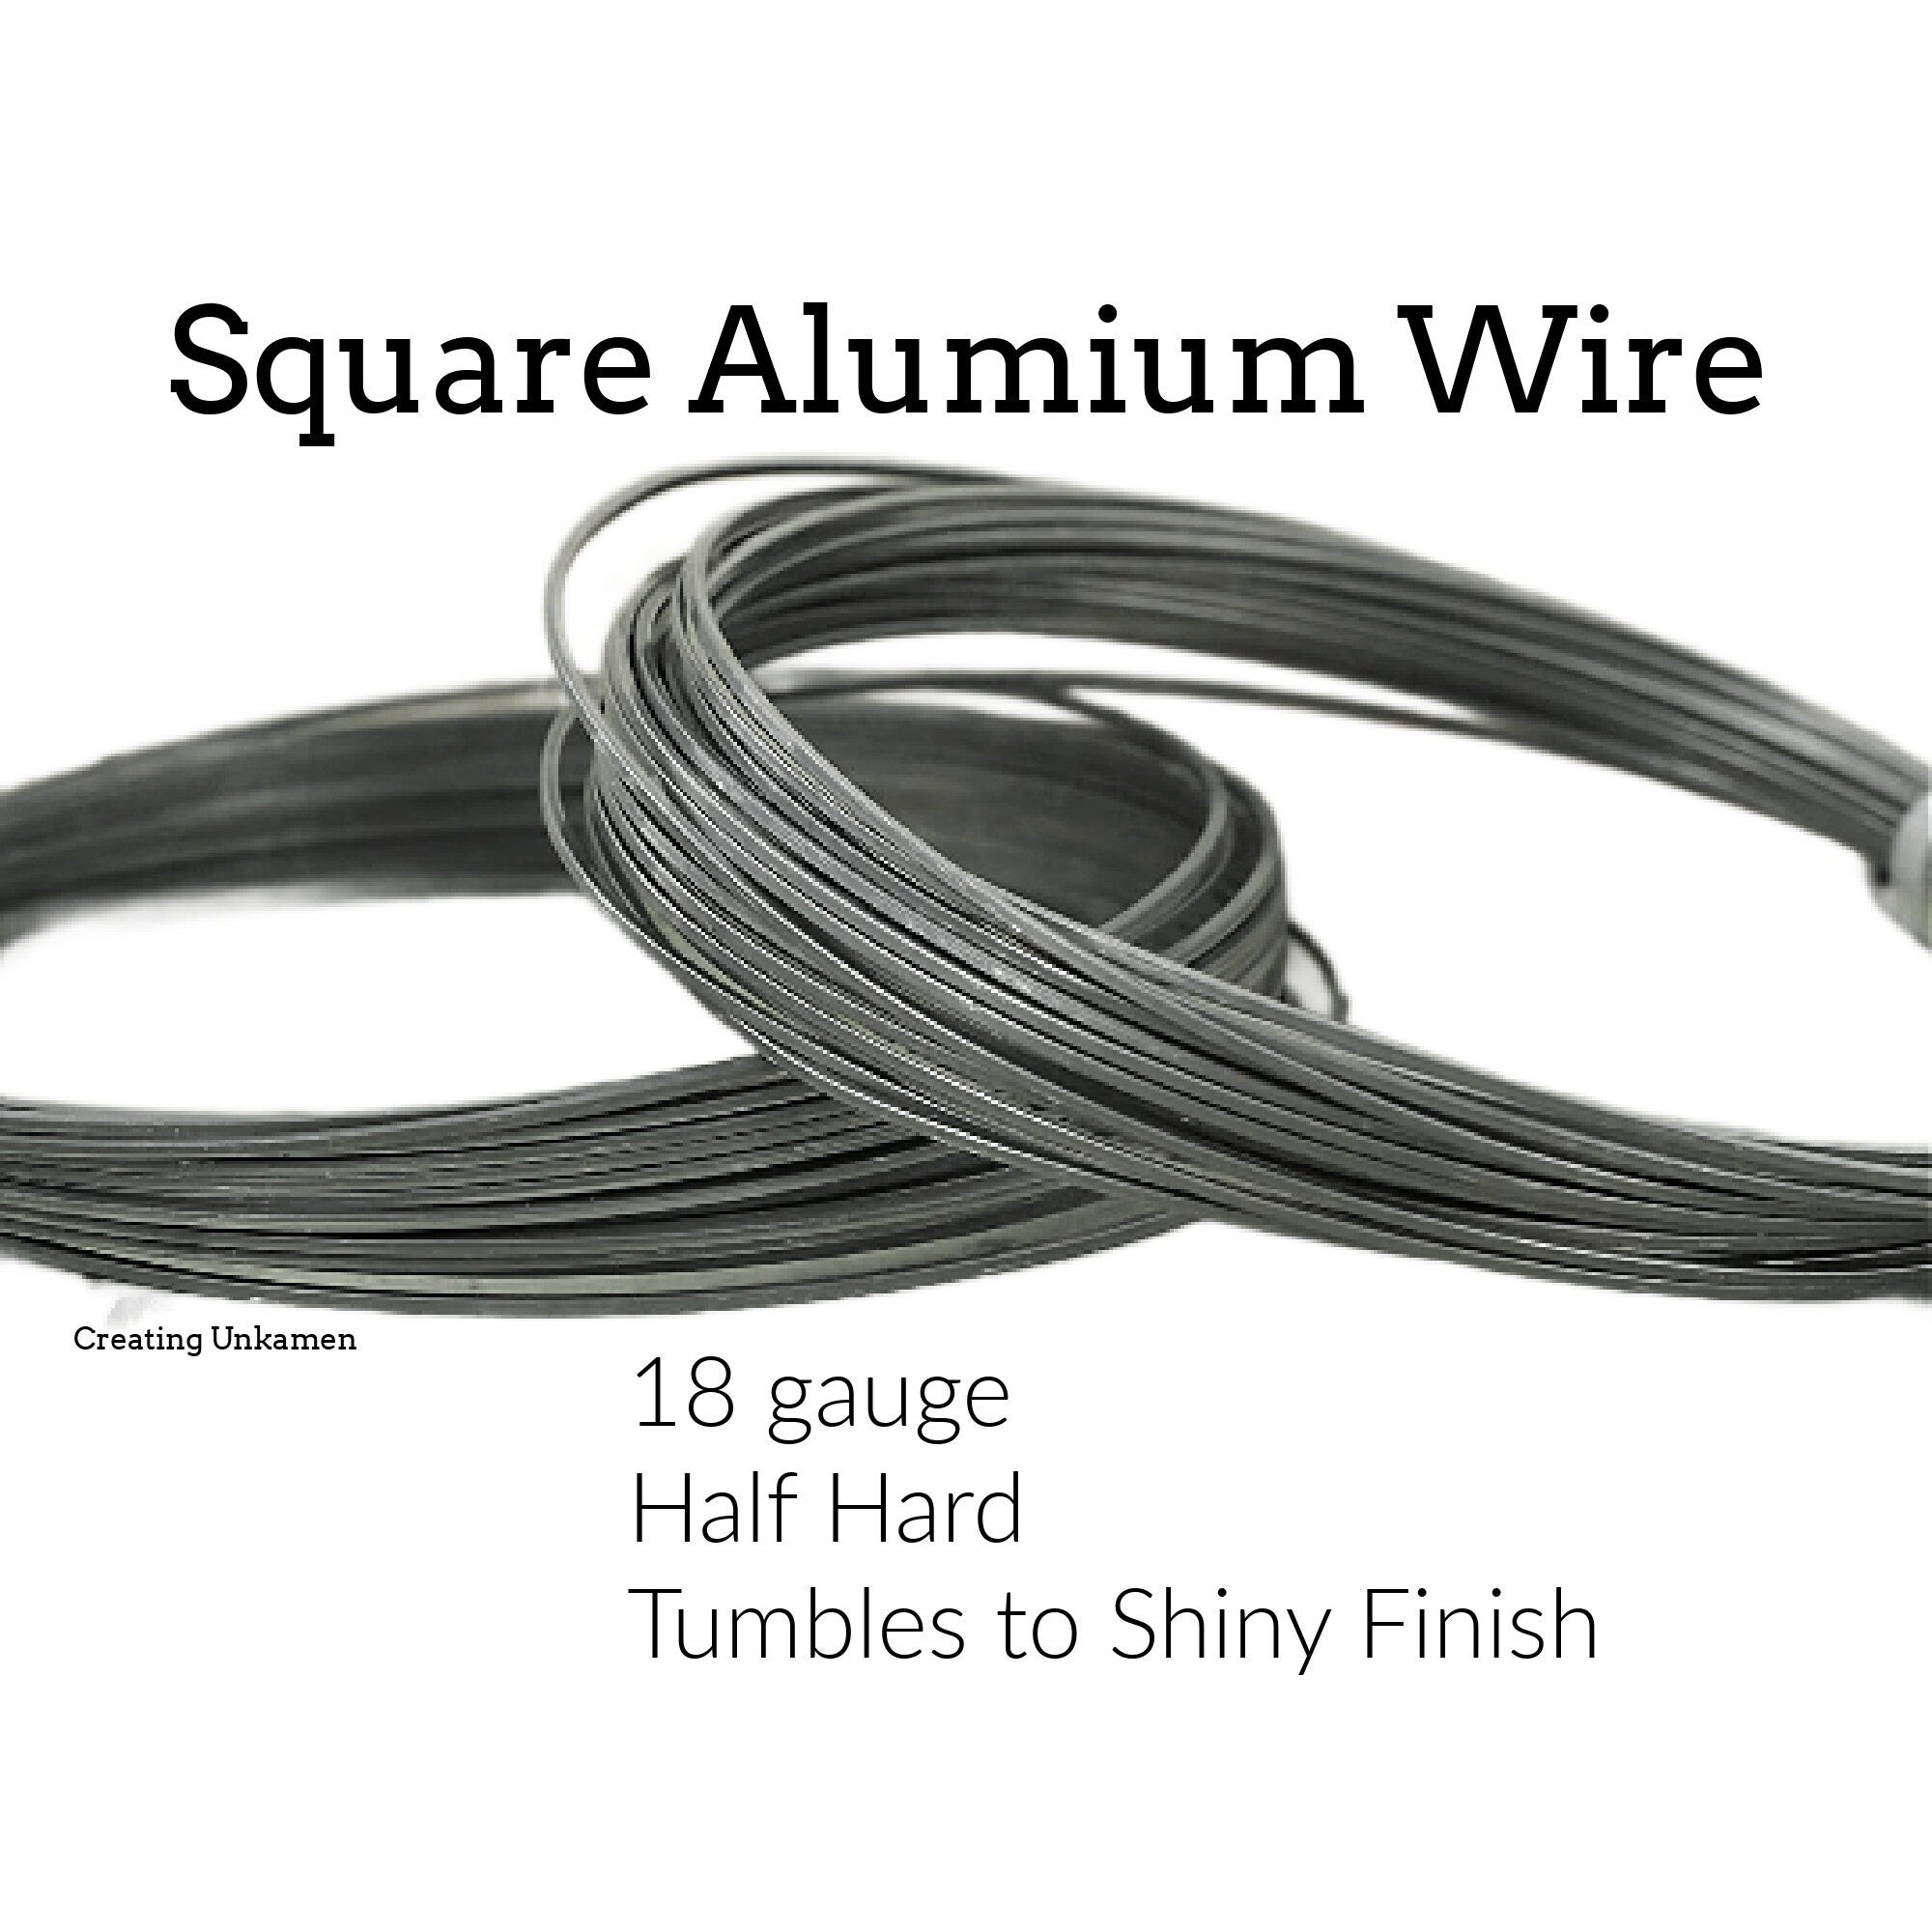 Flat and Square Stainless Steel Wire You Pick 8 Gauge 30 Gauge 100%  Guarantee 